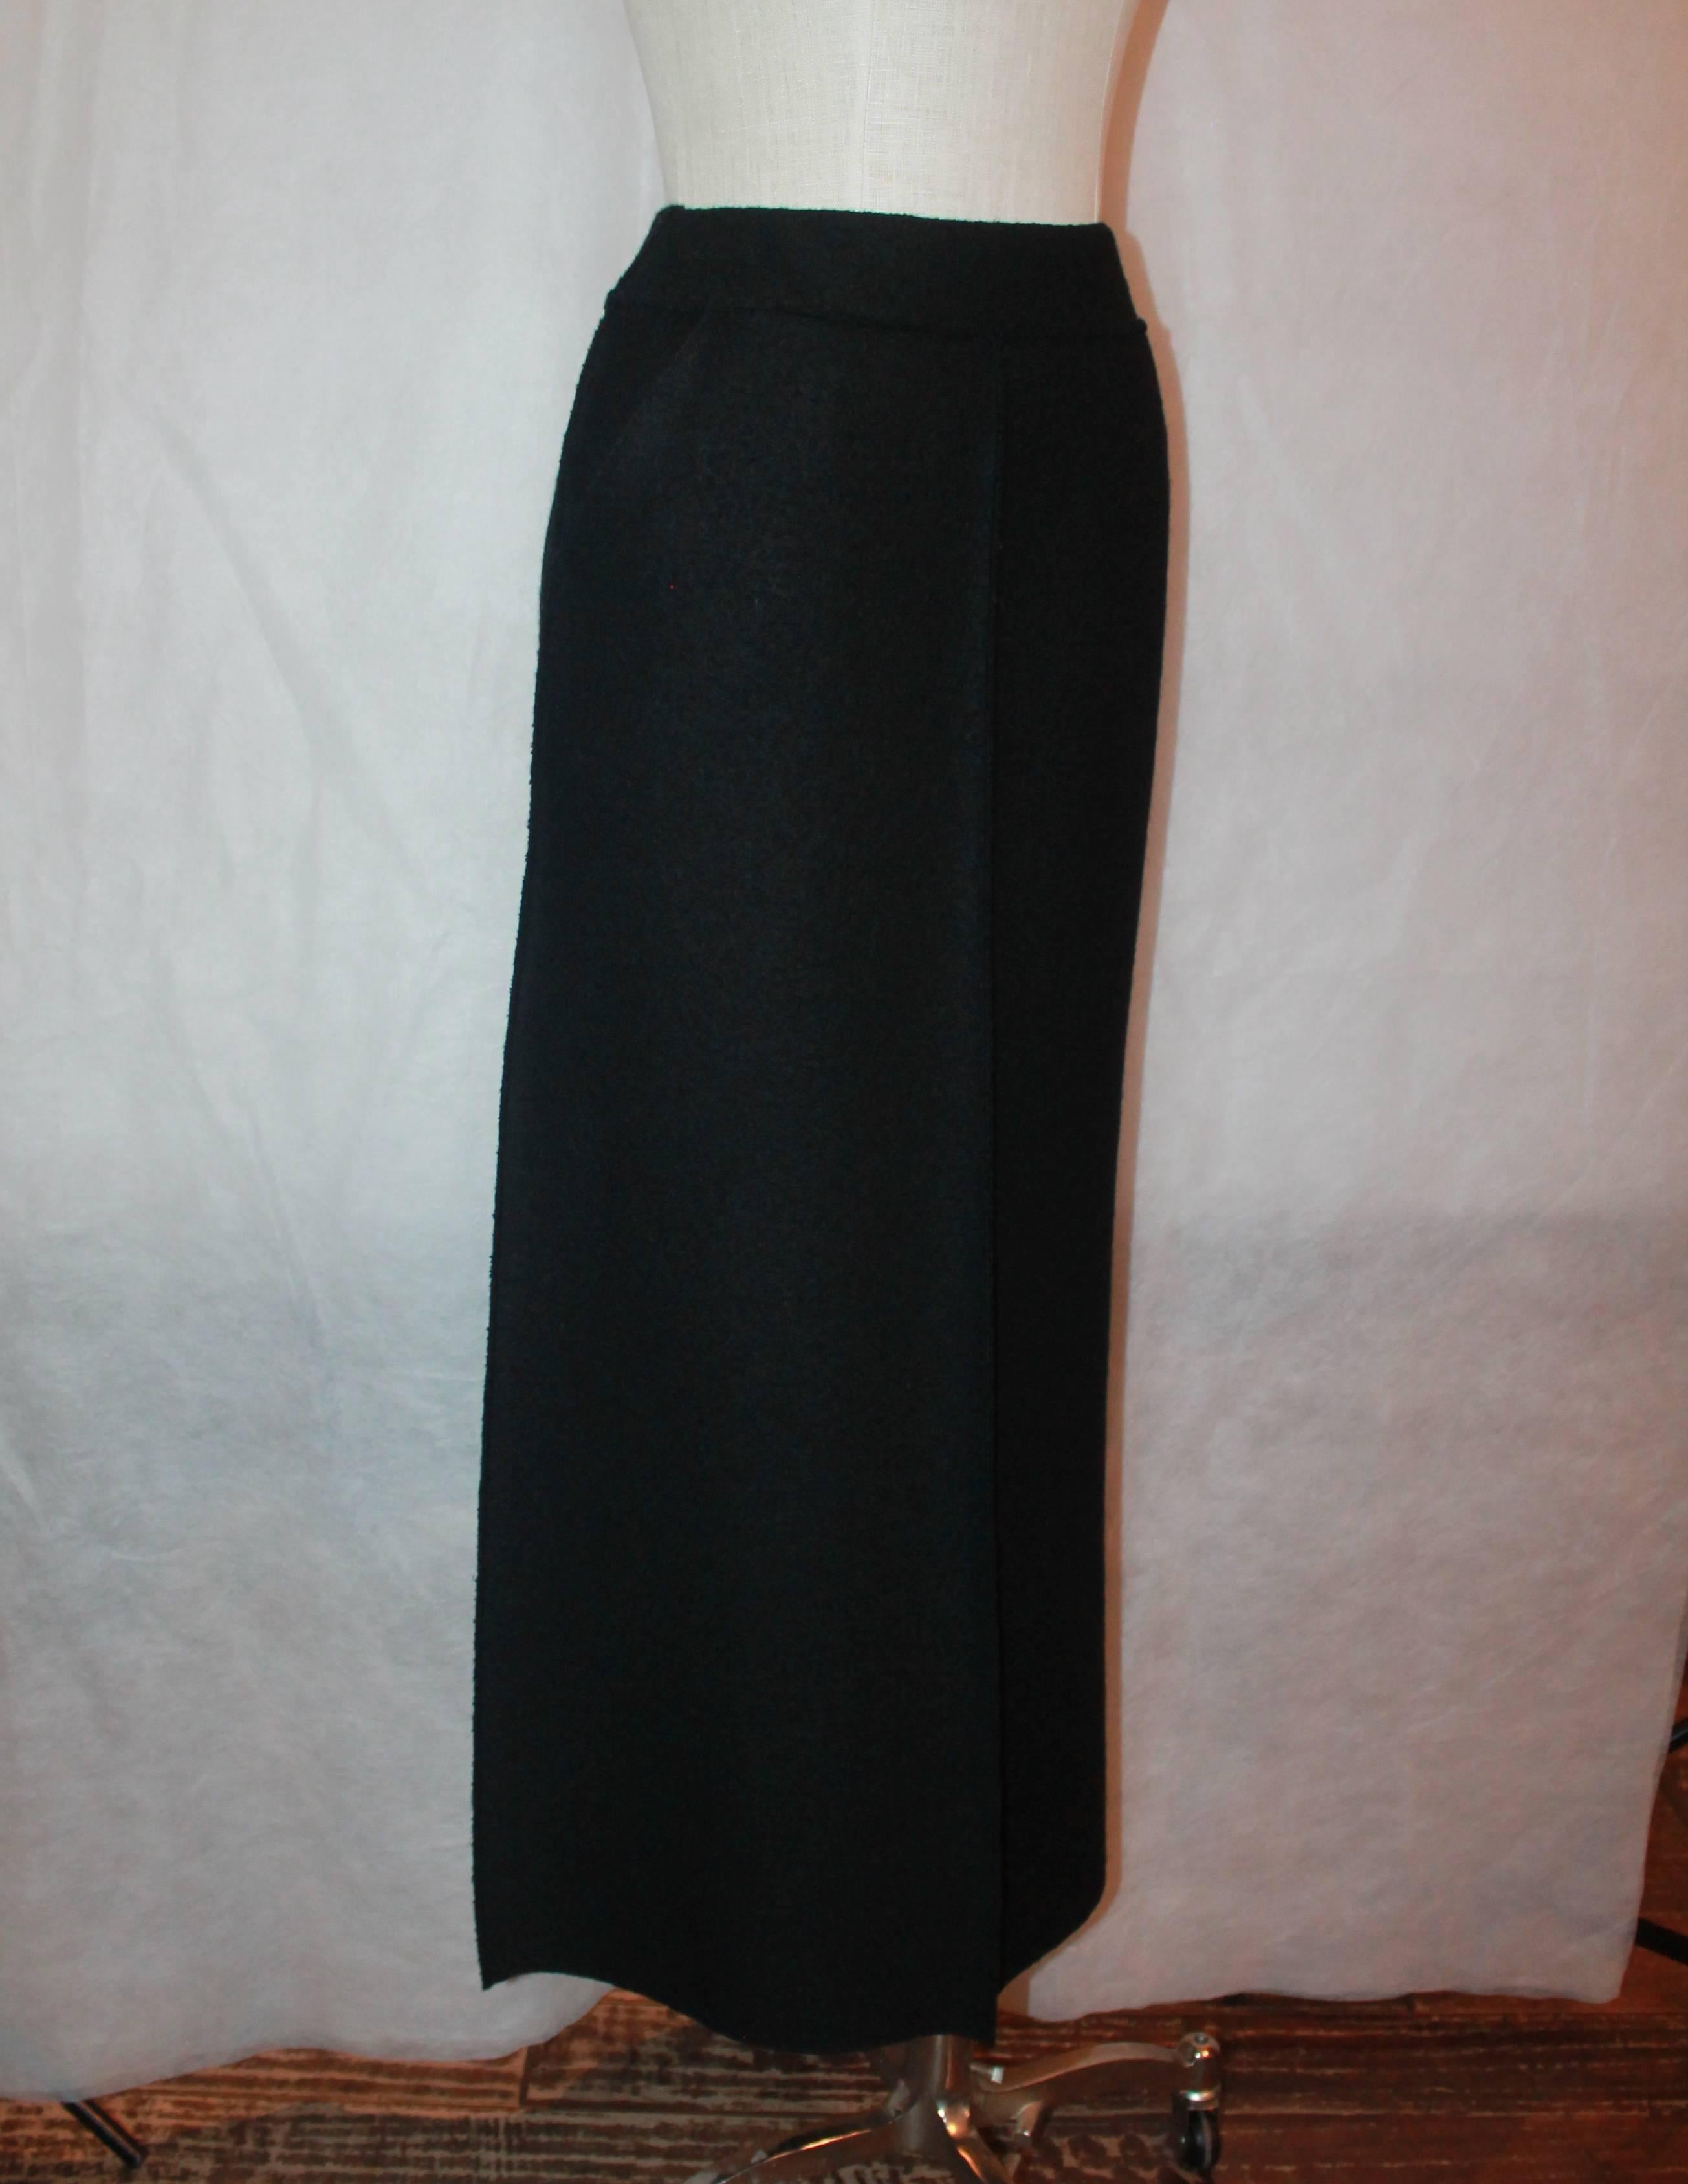 Chanel Black Wool Vintage Maxi Skirt w/ Buttons Down Back - 36 - 1999.  This vintage skirt features two side pockets and a front center pleat.  It has black 